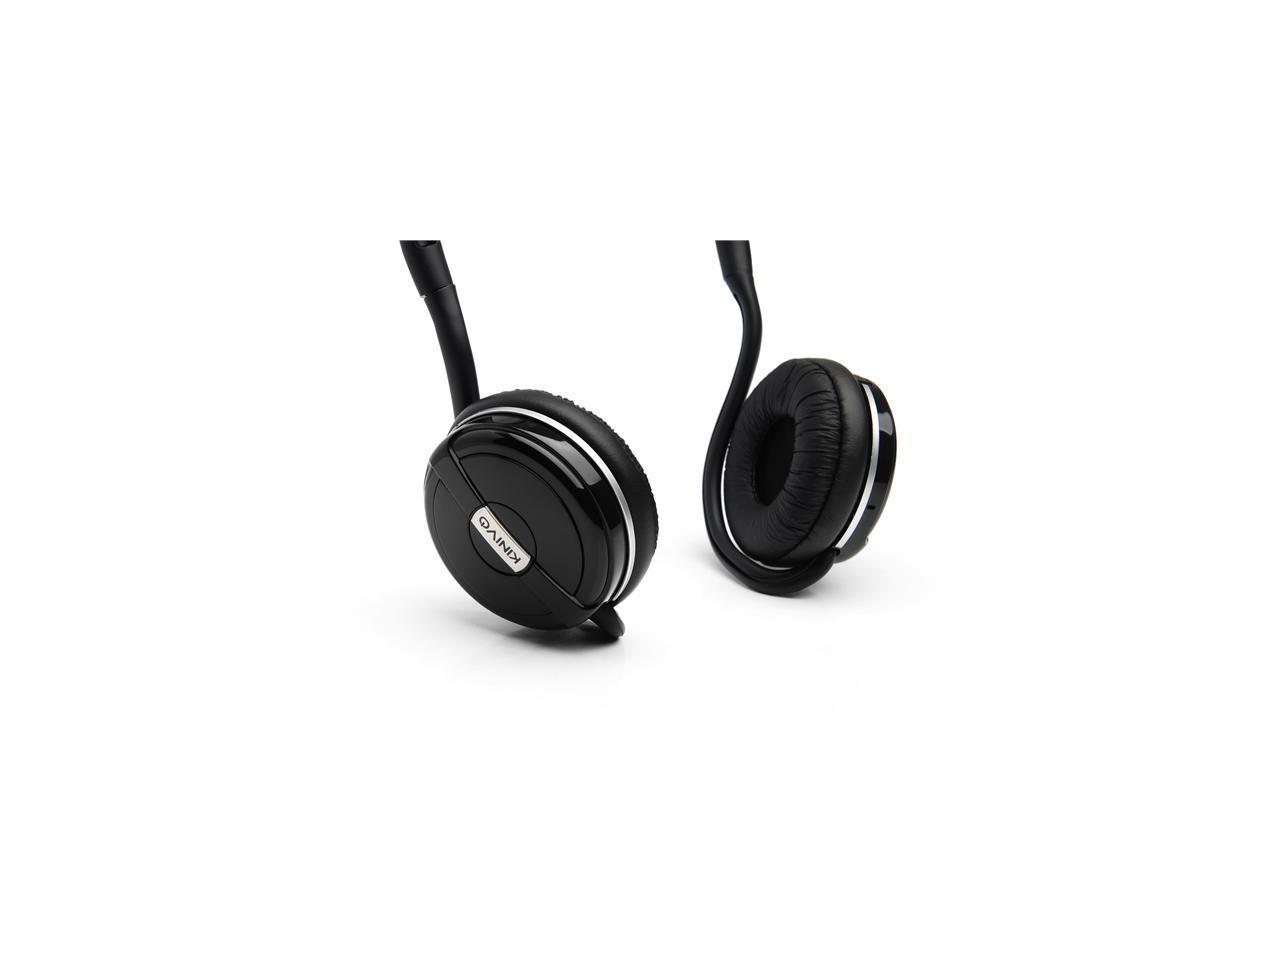 Kinivo BTH240 Bluetooth Stereo Headphone - Supports Wireless Music Streaming and Hands-Free calling (Black)